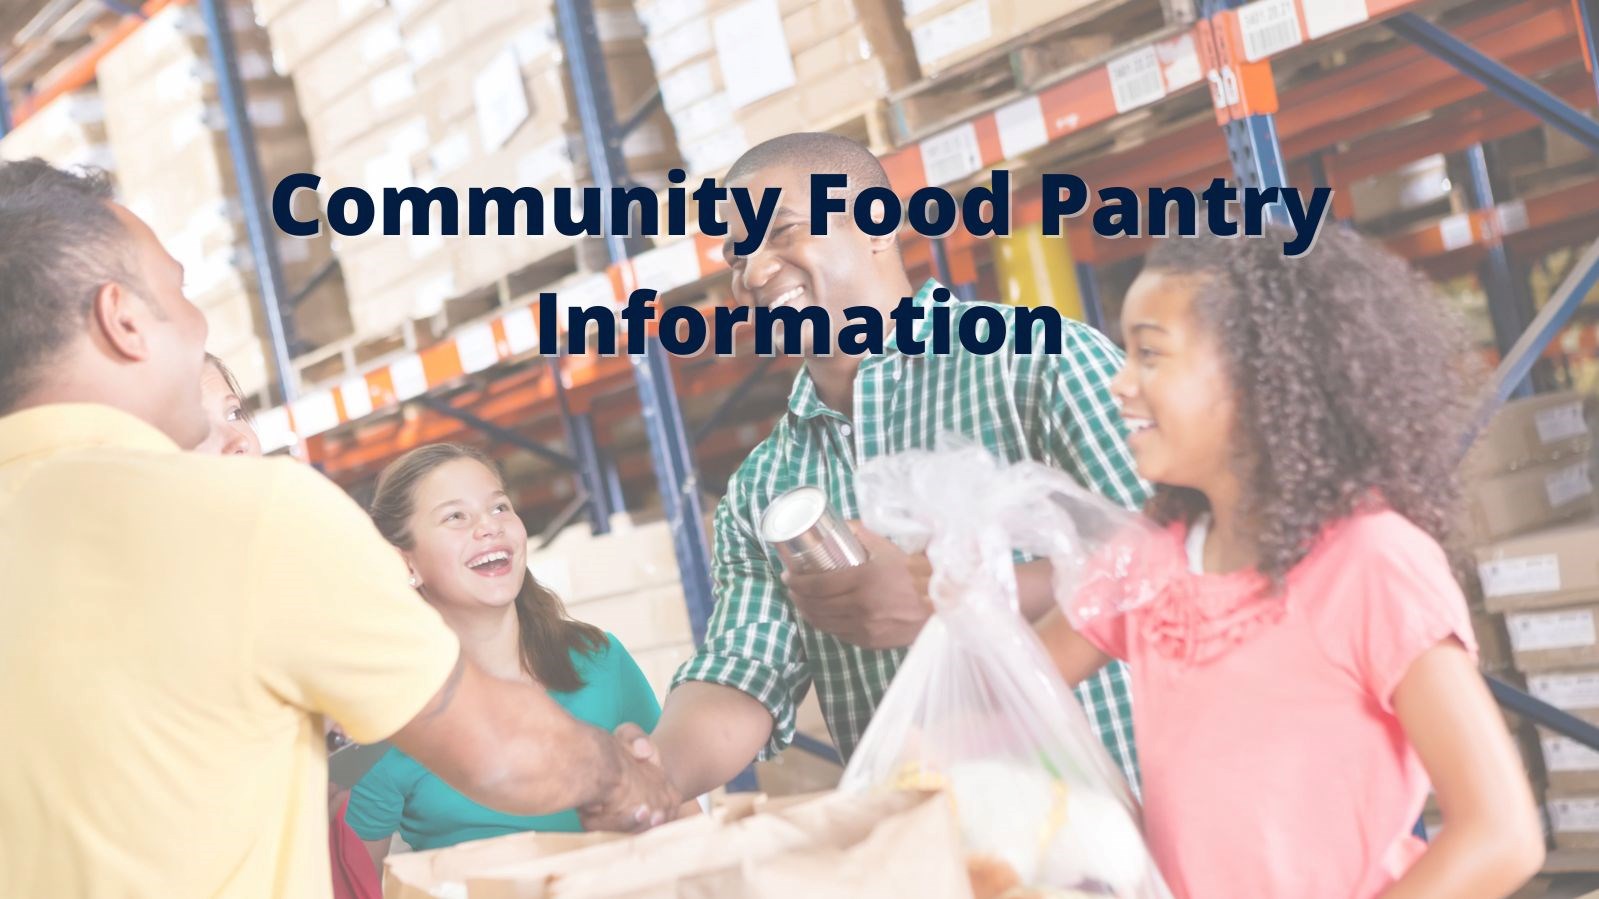 Food pantry with families receiving food. Text Reads: Community Food Pantry Information